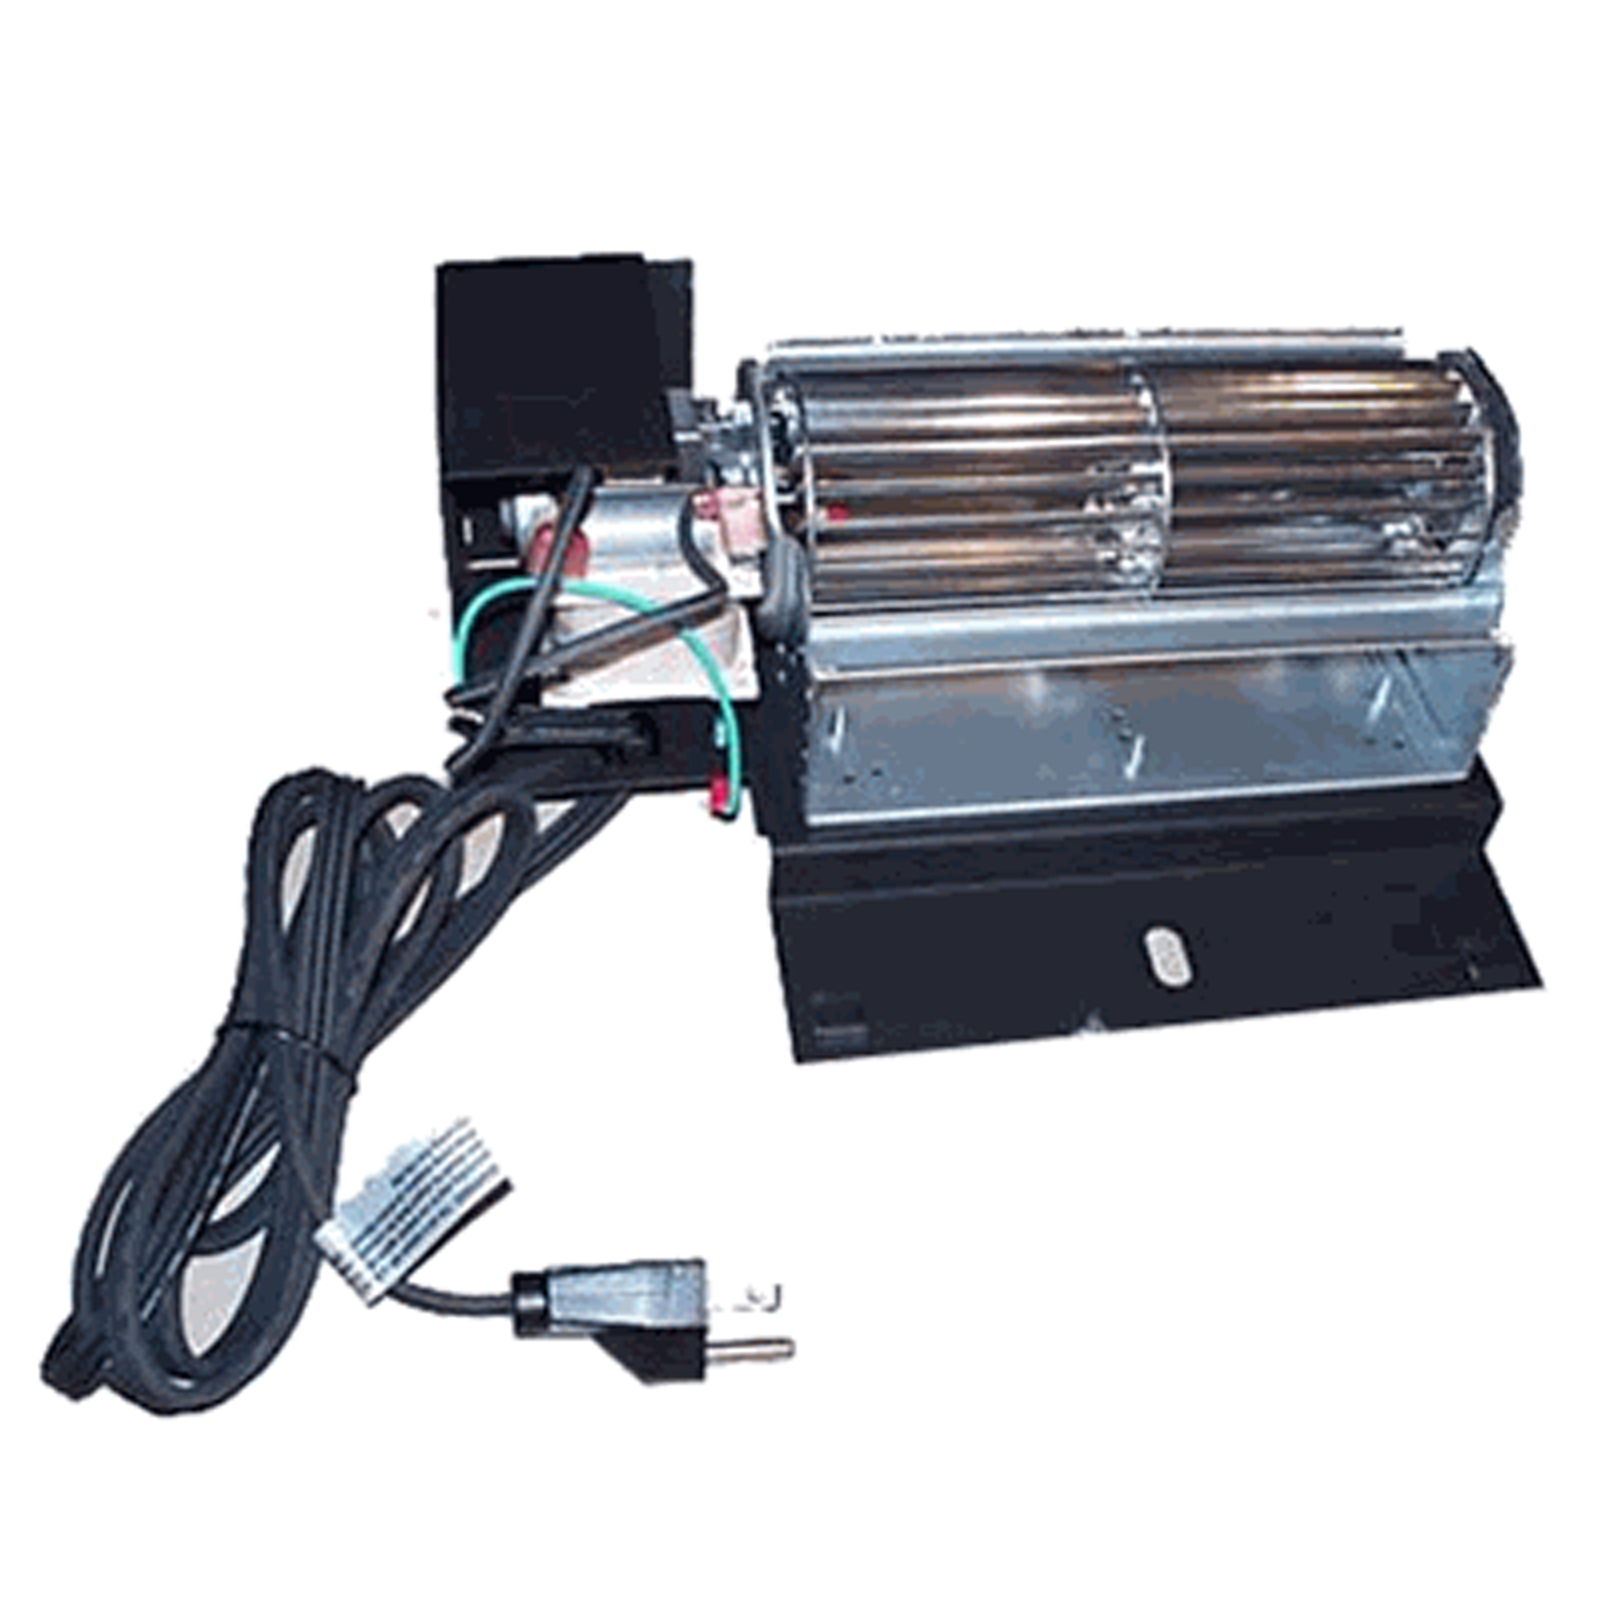 Napoleon Premium Blower Kit with Variable Speed | GZ600KT